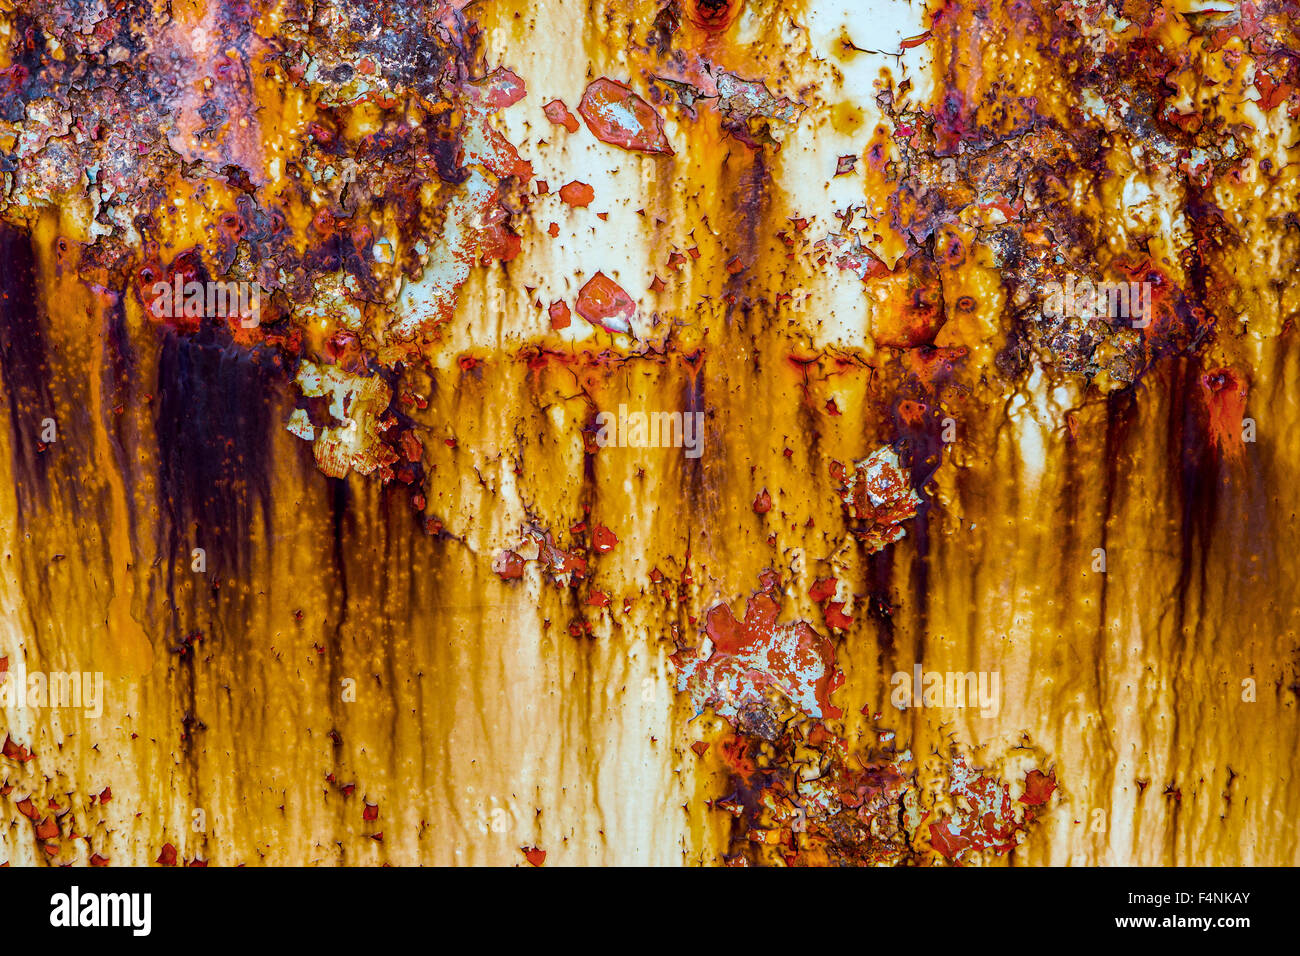 Flaking paint and rust on metal. Stock Photo